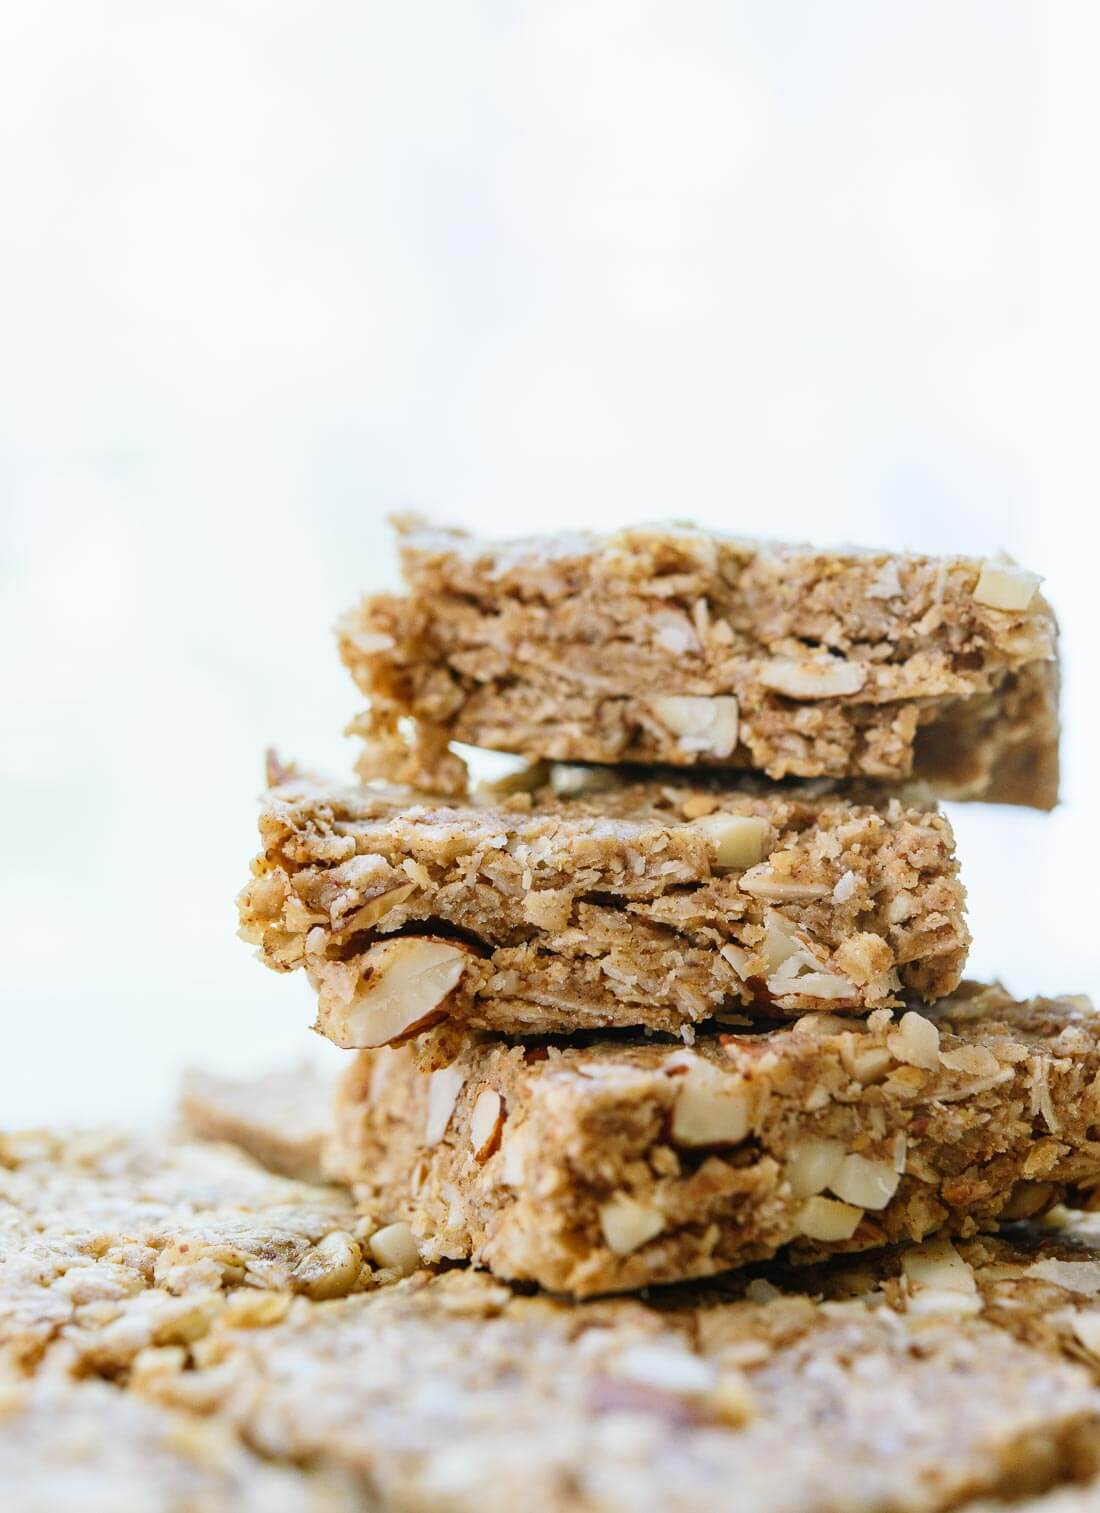 This amazing granola bar recipe is so easy and delicious! cookieandkate.com